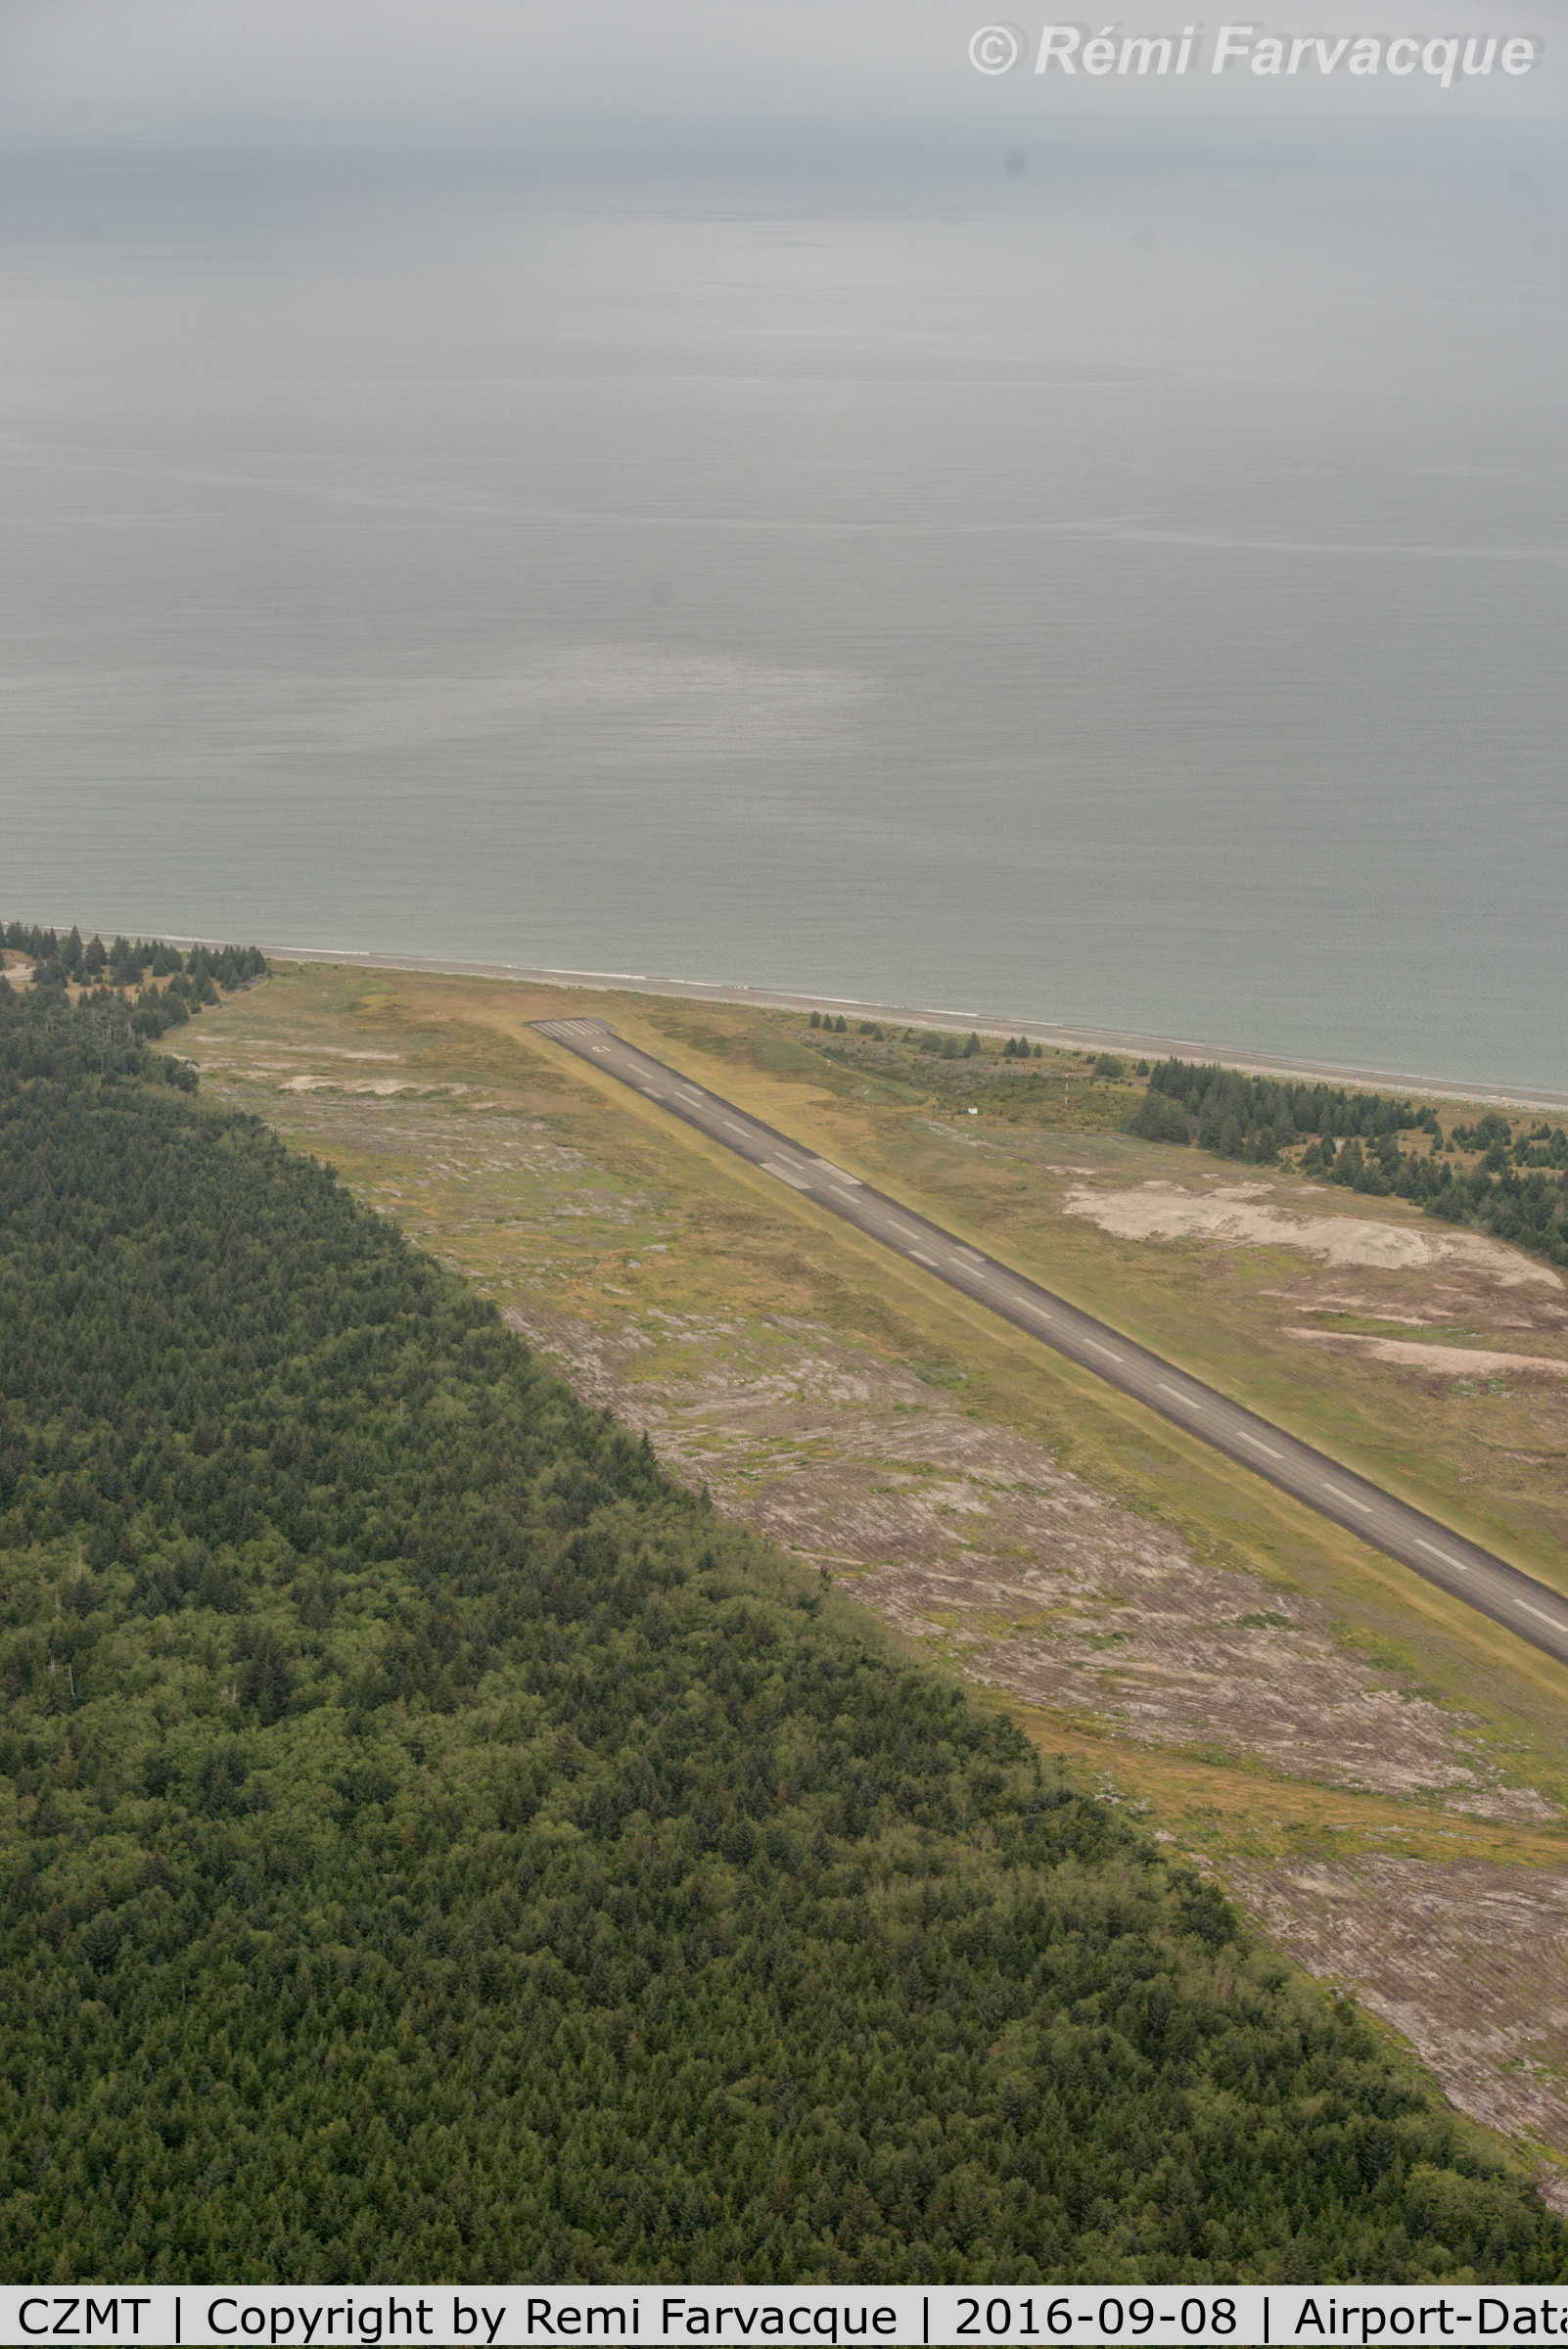 Masset Airport, Masset, British Columbia Canada (CZMT) - View north over north end of strip.